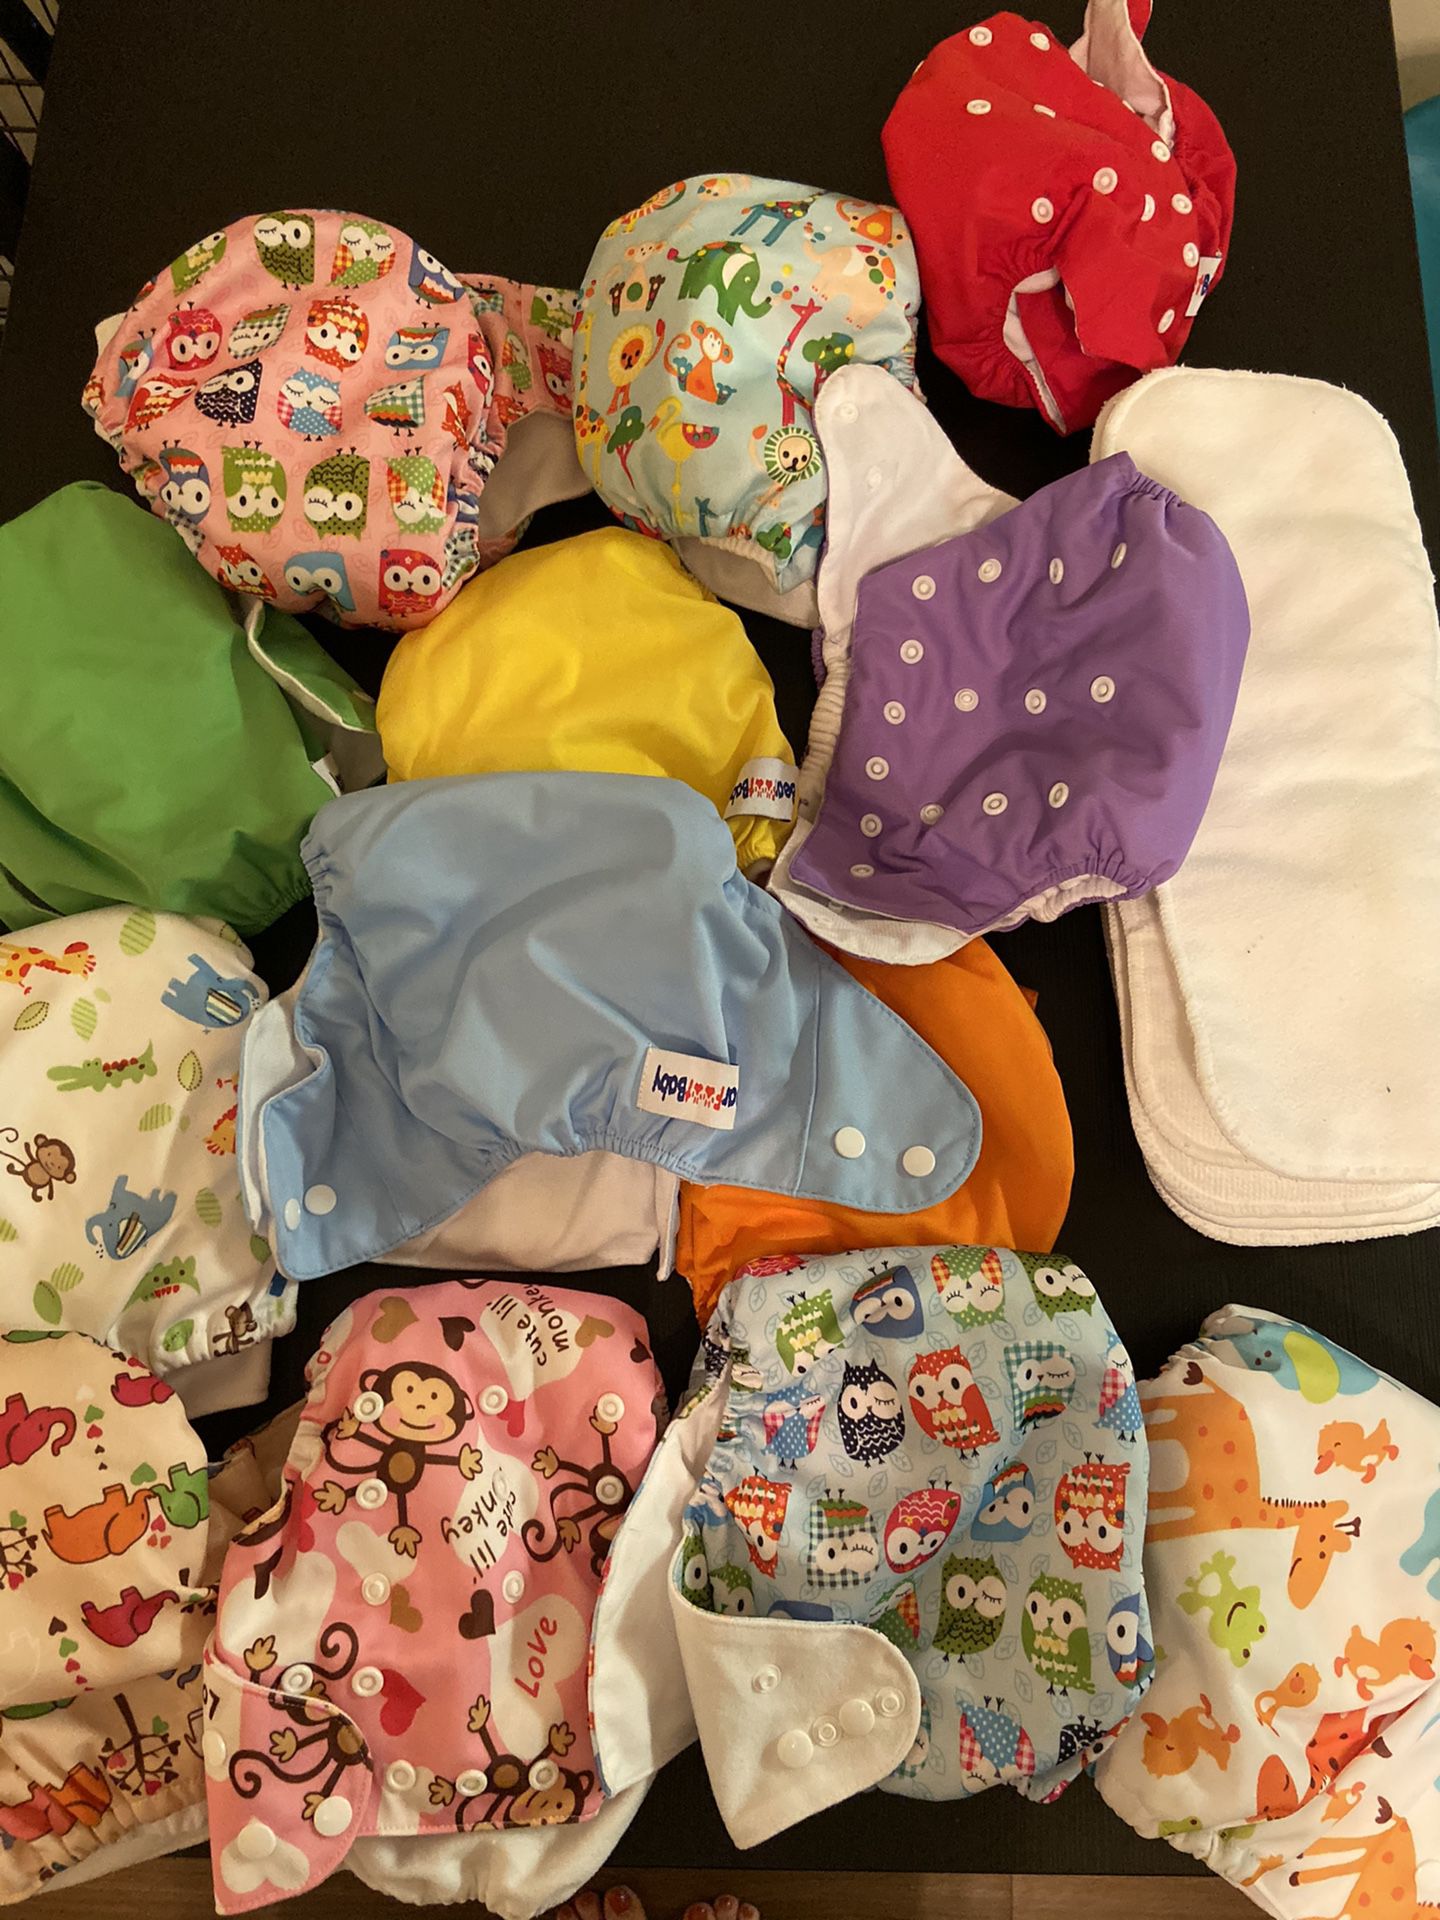 Cloth diapers and liners